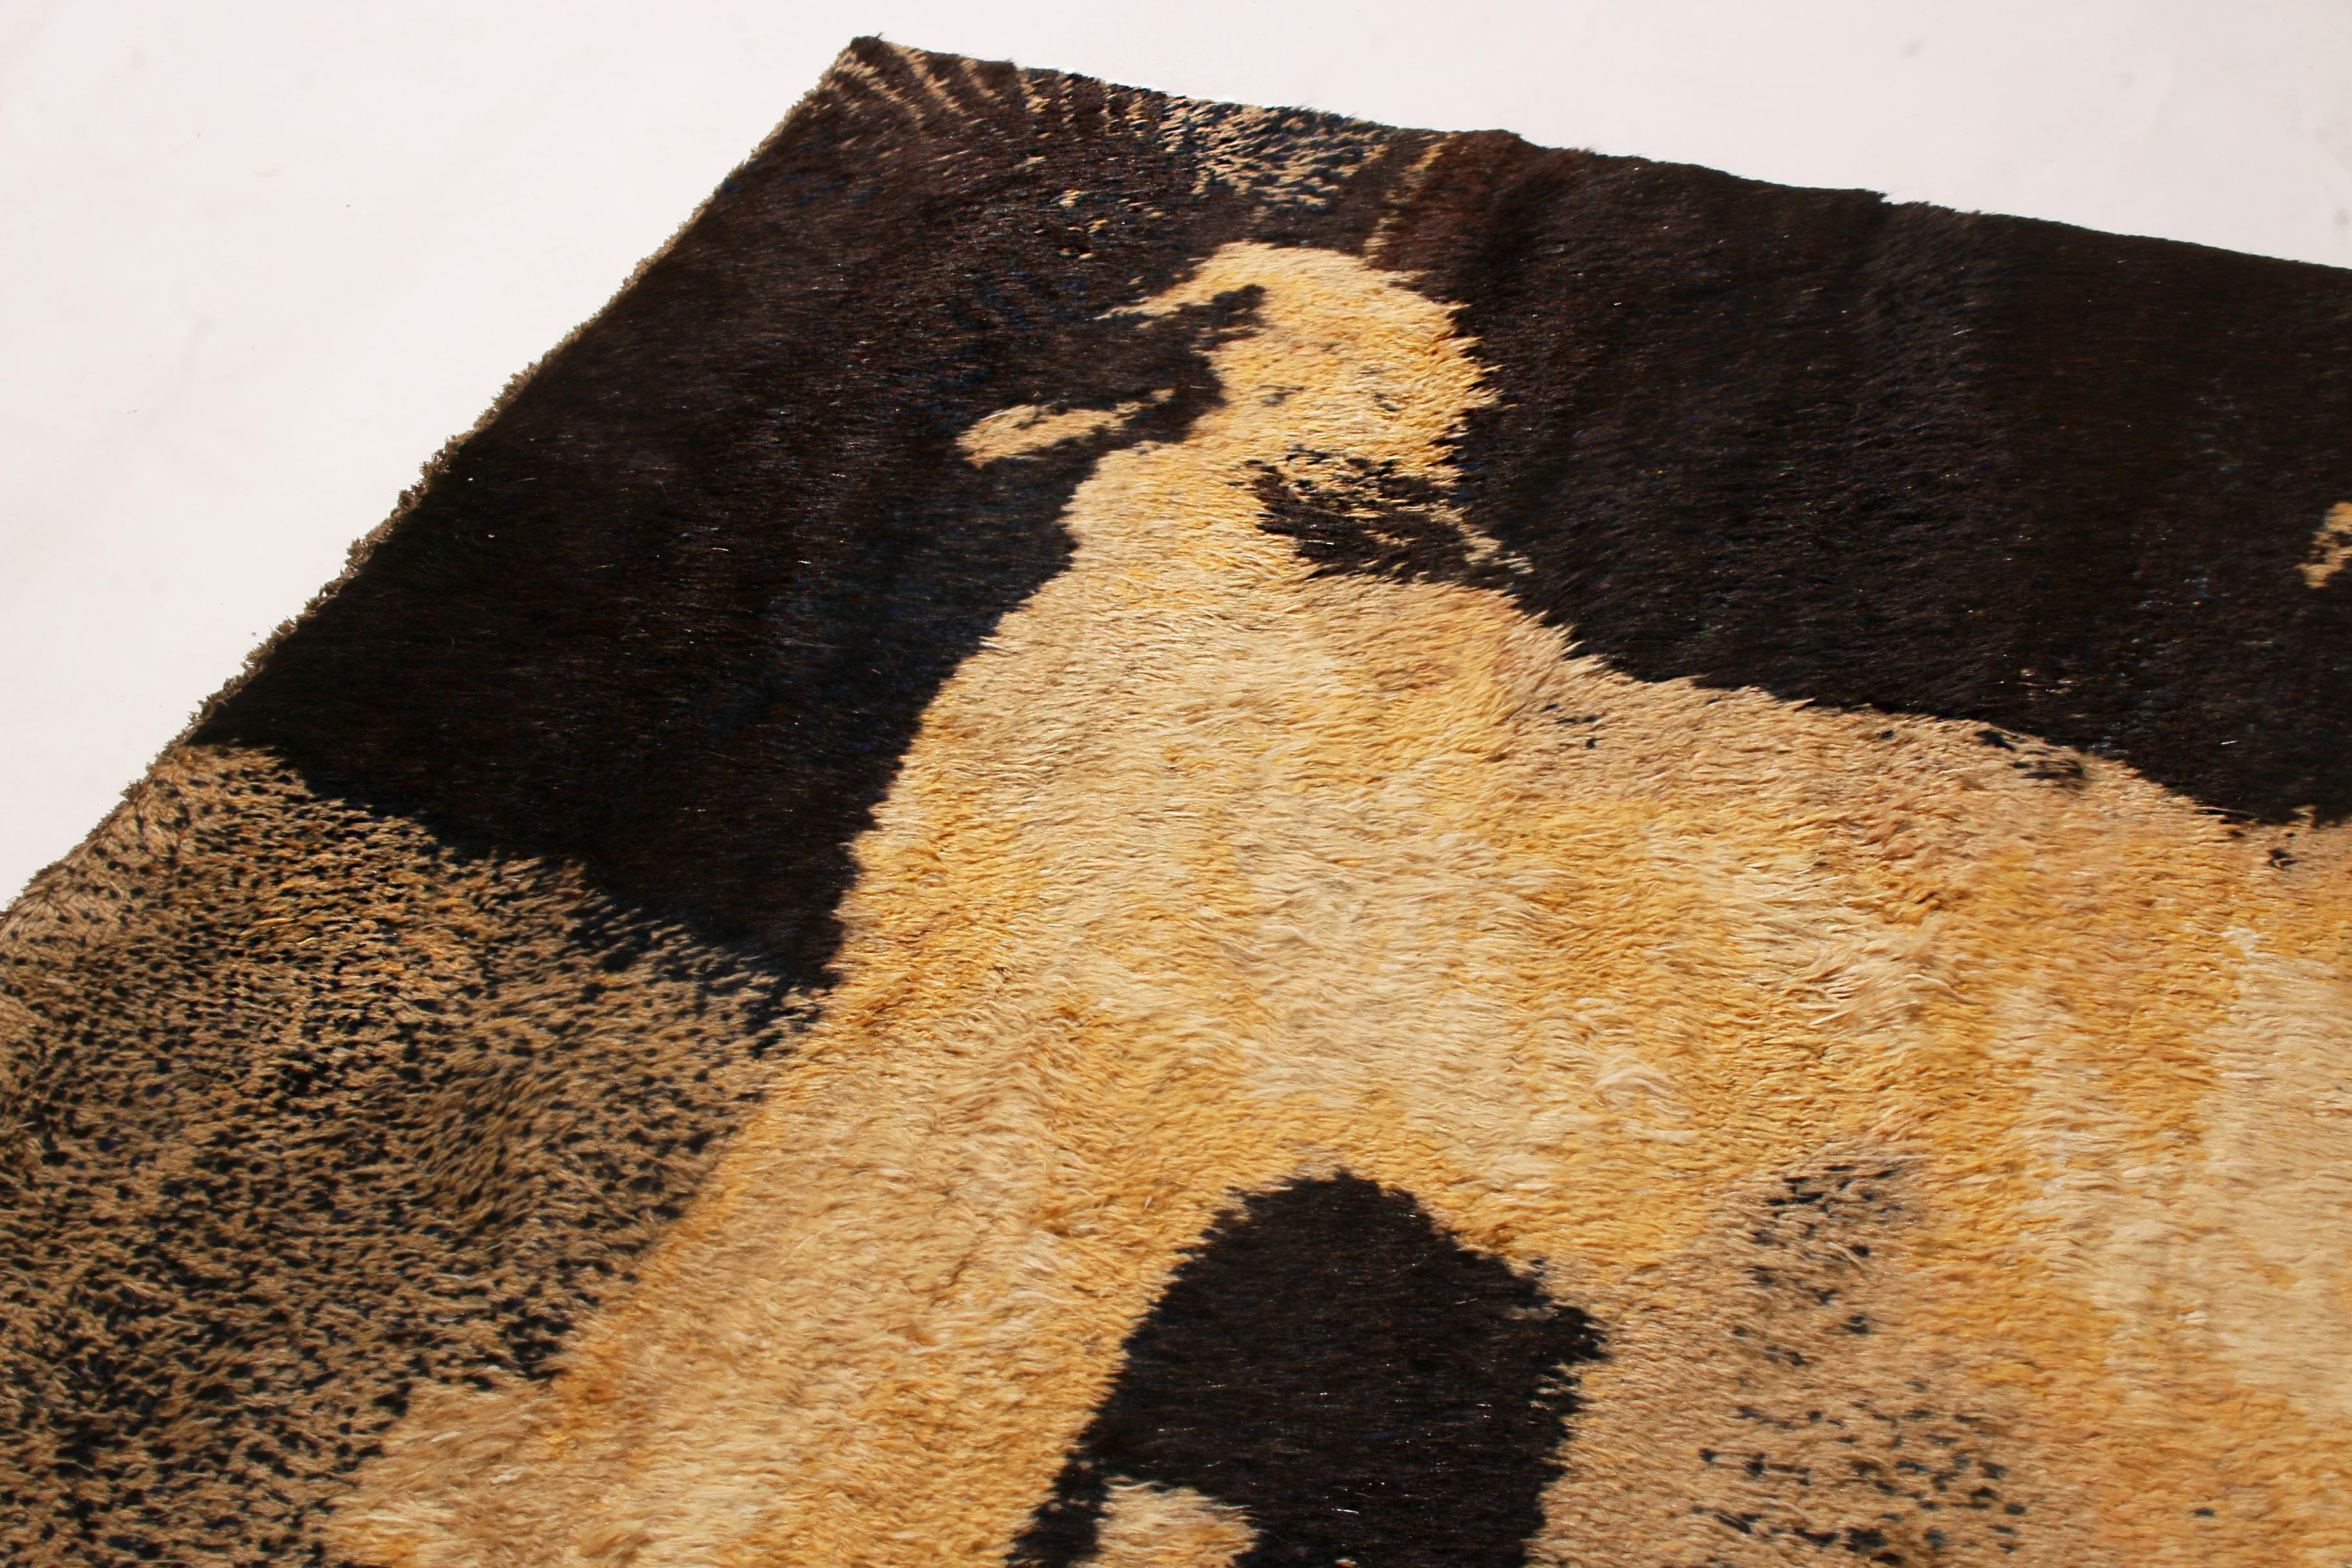 Hand-Knotted Afghan Pictorial Dog Design Black and Gold Goat Hair Rug